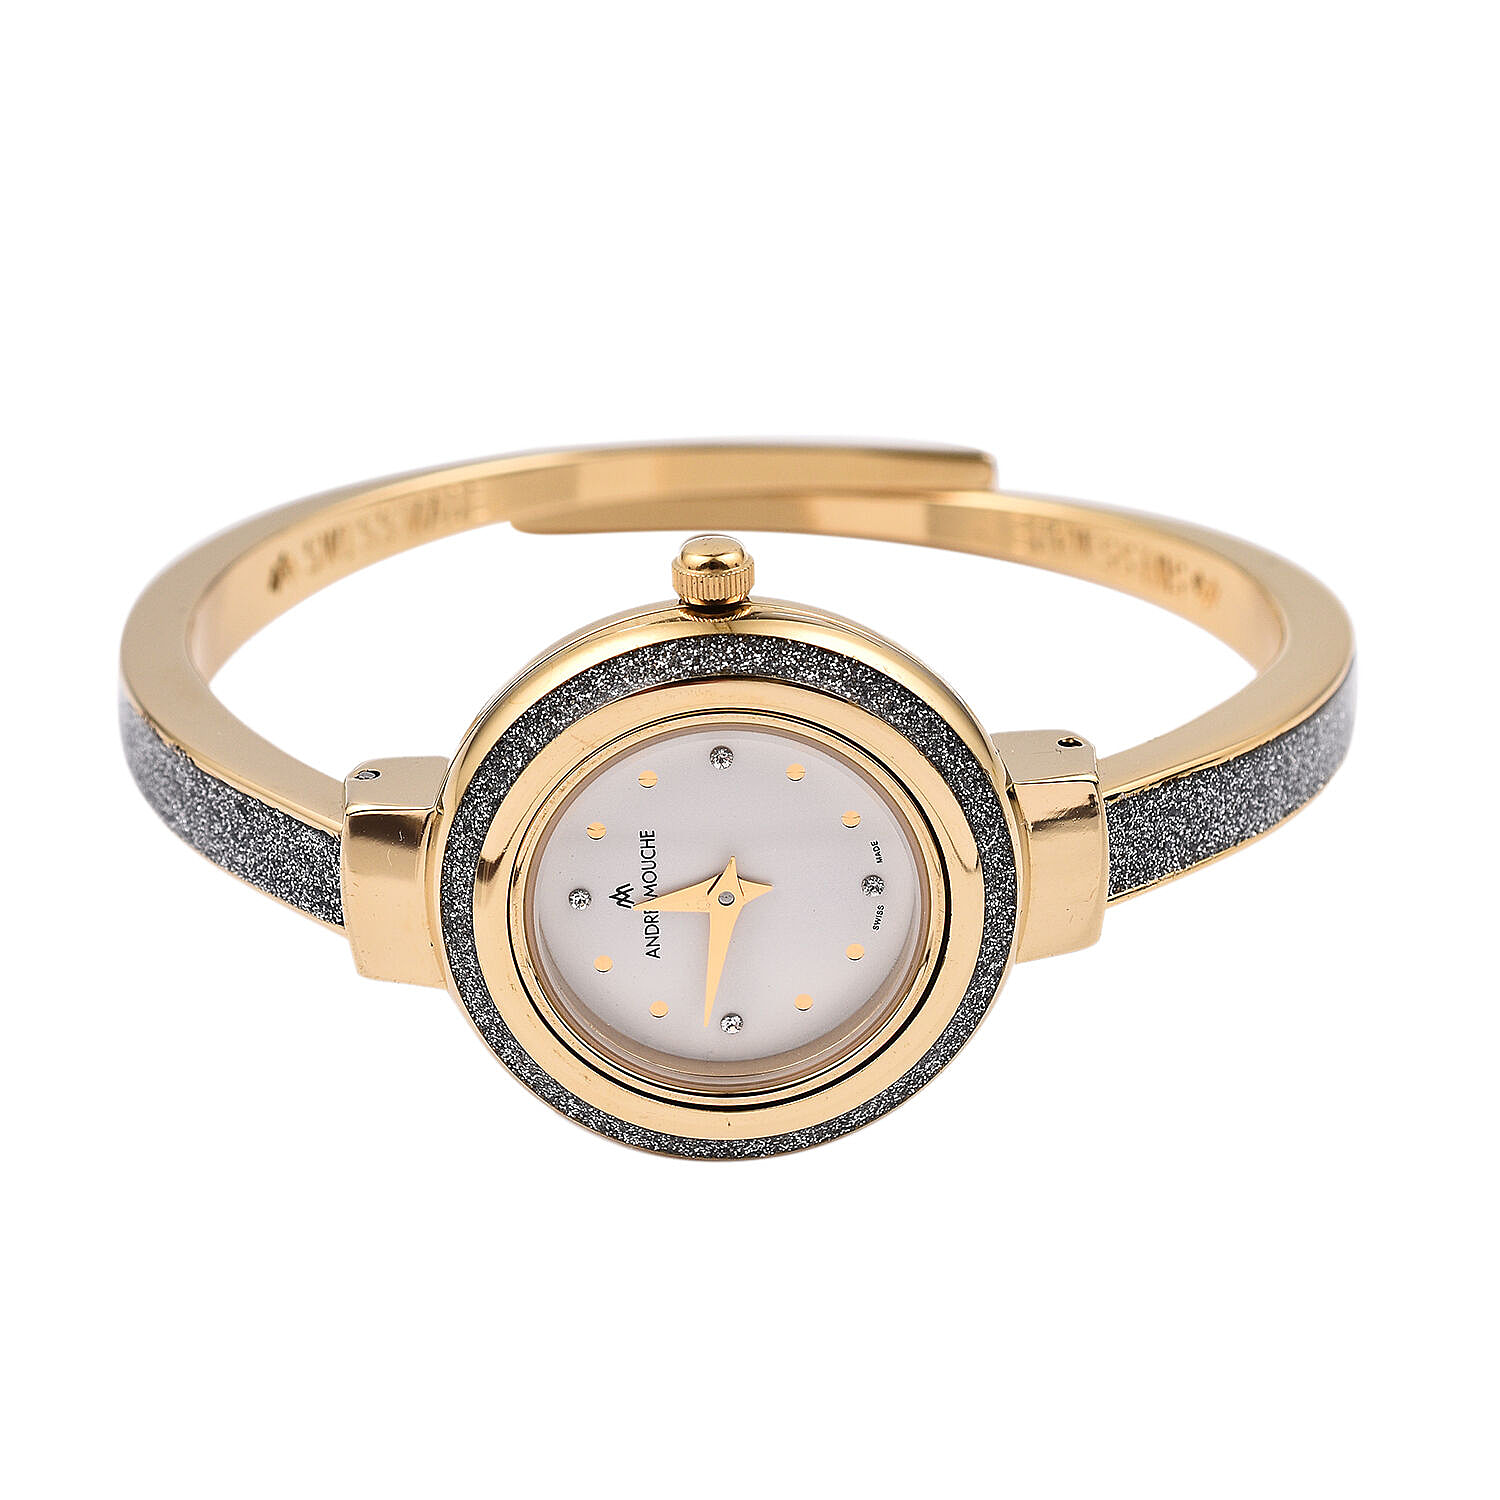 DOD-Andre-Mouche-Swiss-Ronda-Movement-Aura-Gold-Silverpearl-18ct-Gold-